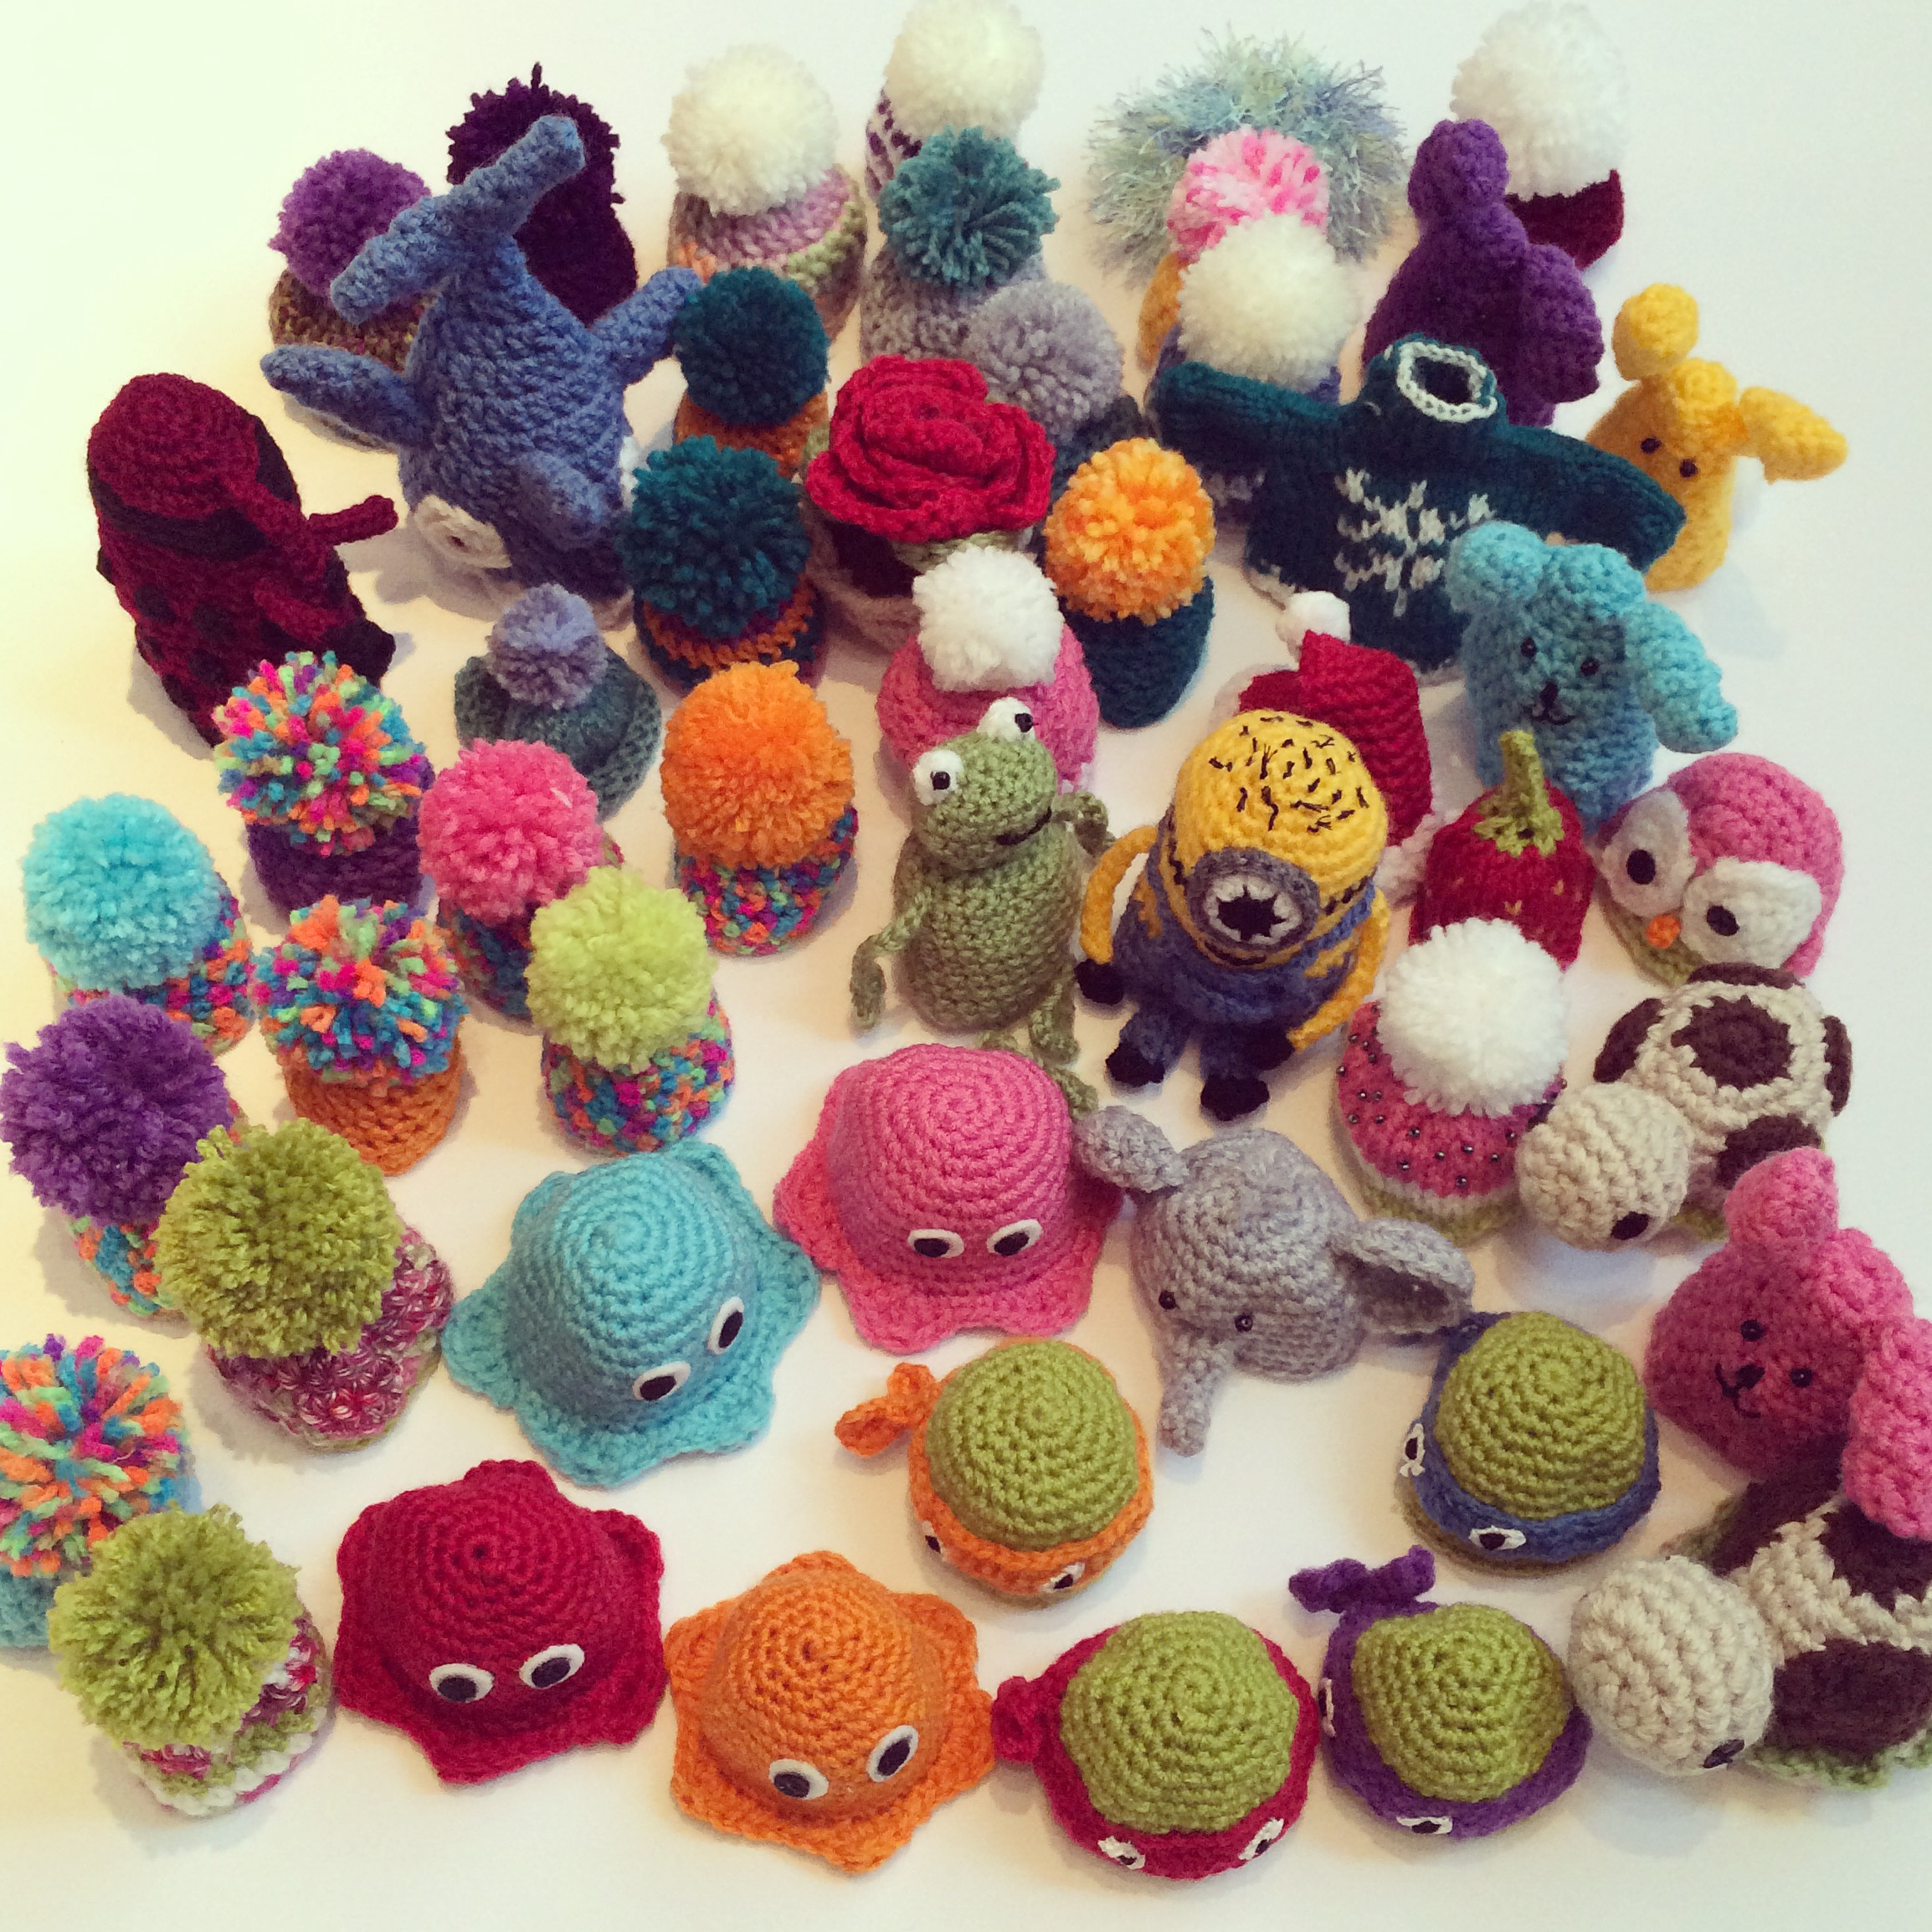 Egg Cosies Knitting Pattern Free The Innocent Big Knit Ready For Posting B L U E B E R R Y Z I N G